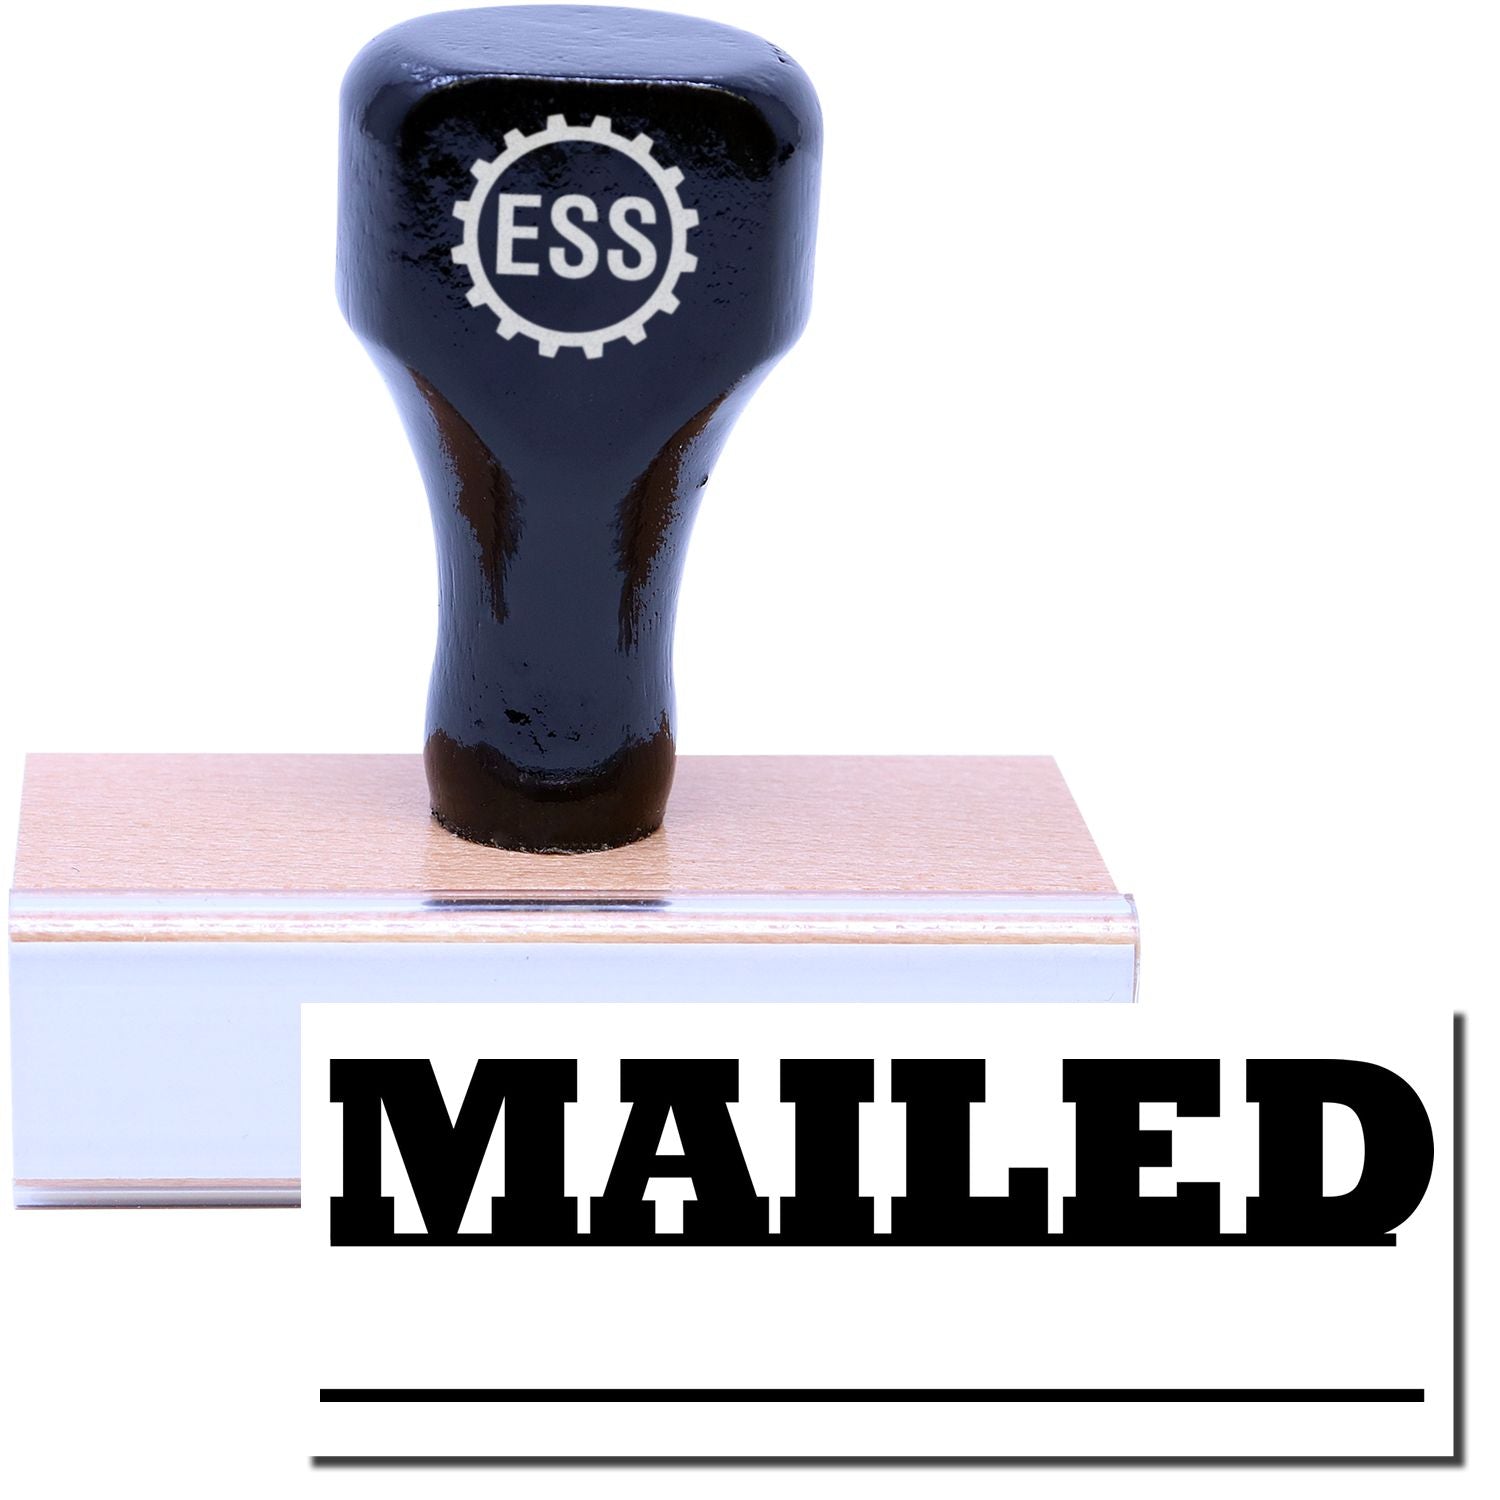 A stock office rubber stamp with a stamped image showing how the text "MAILED" in a large font with a date line underneath the text is displayed after stamping.